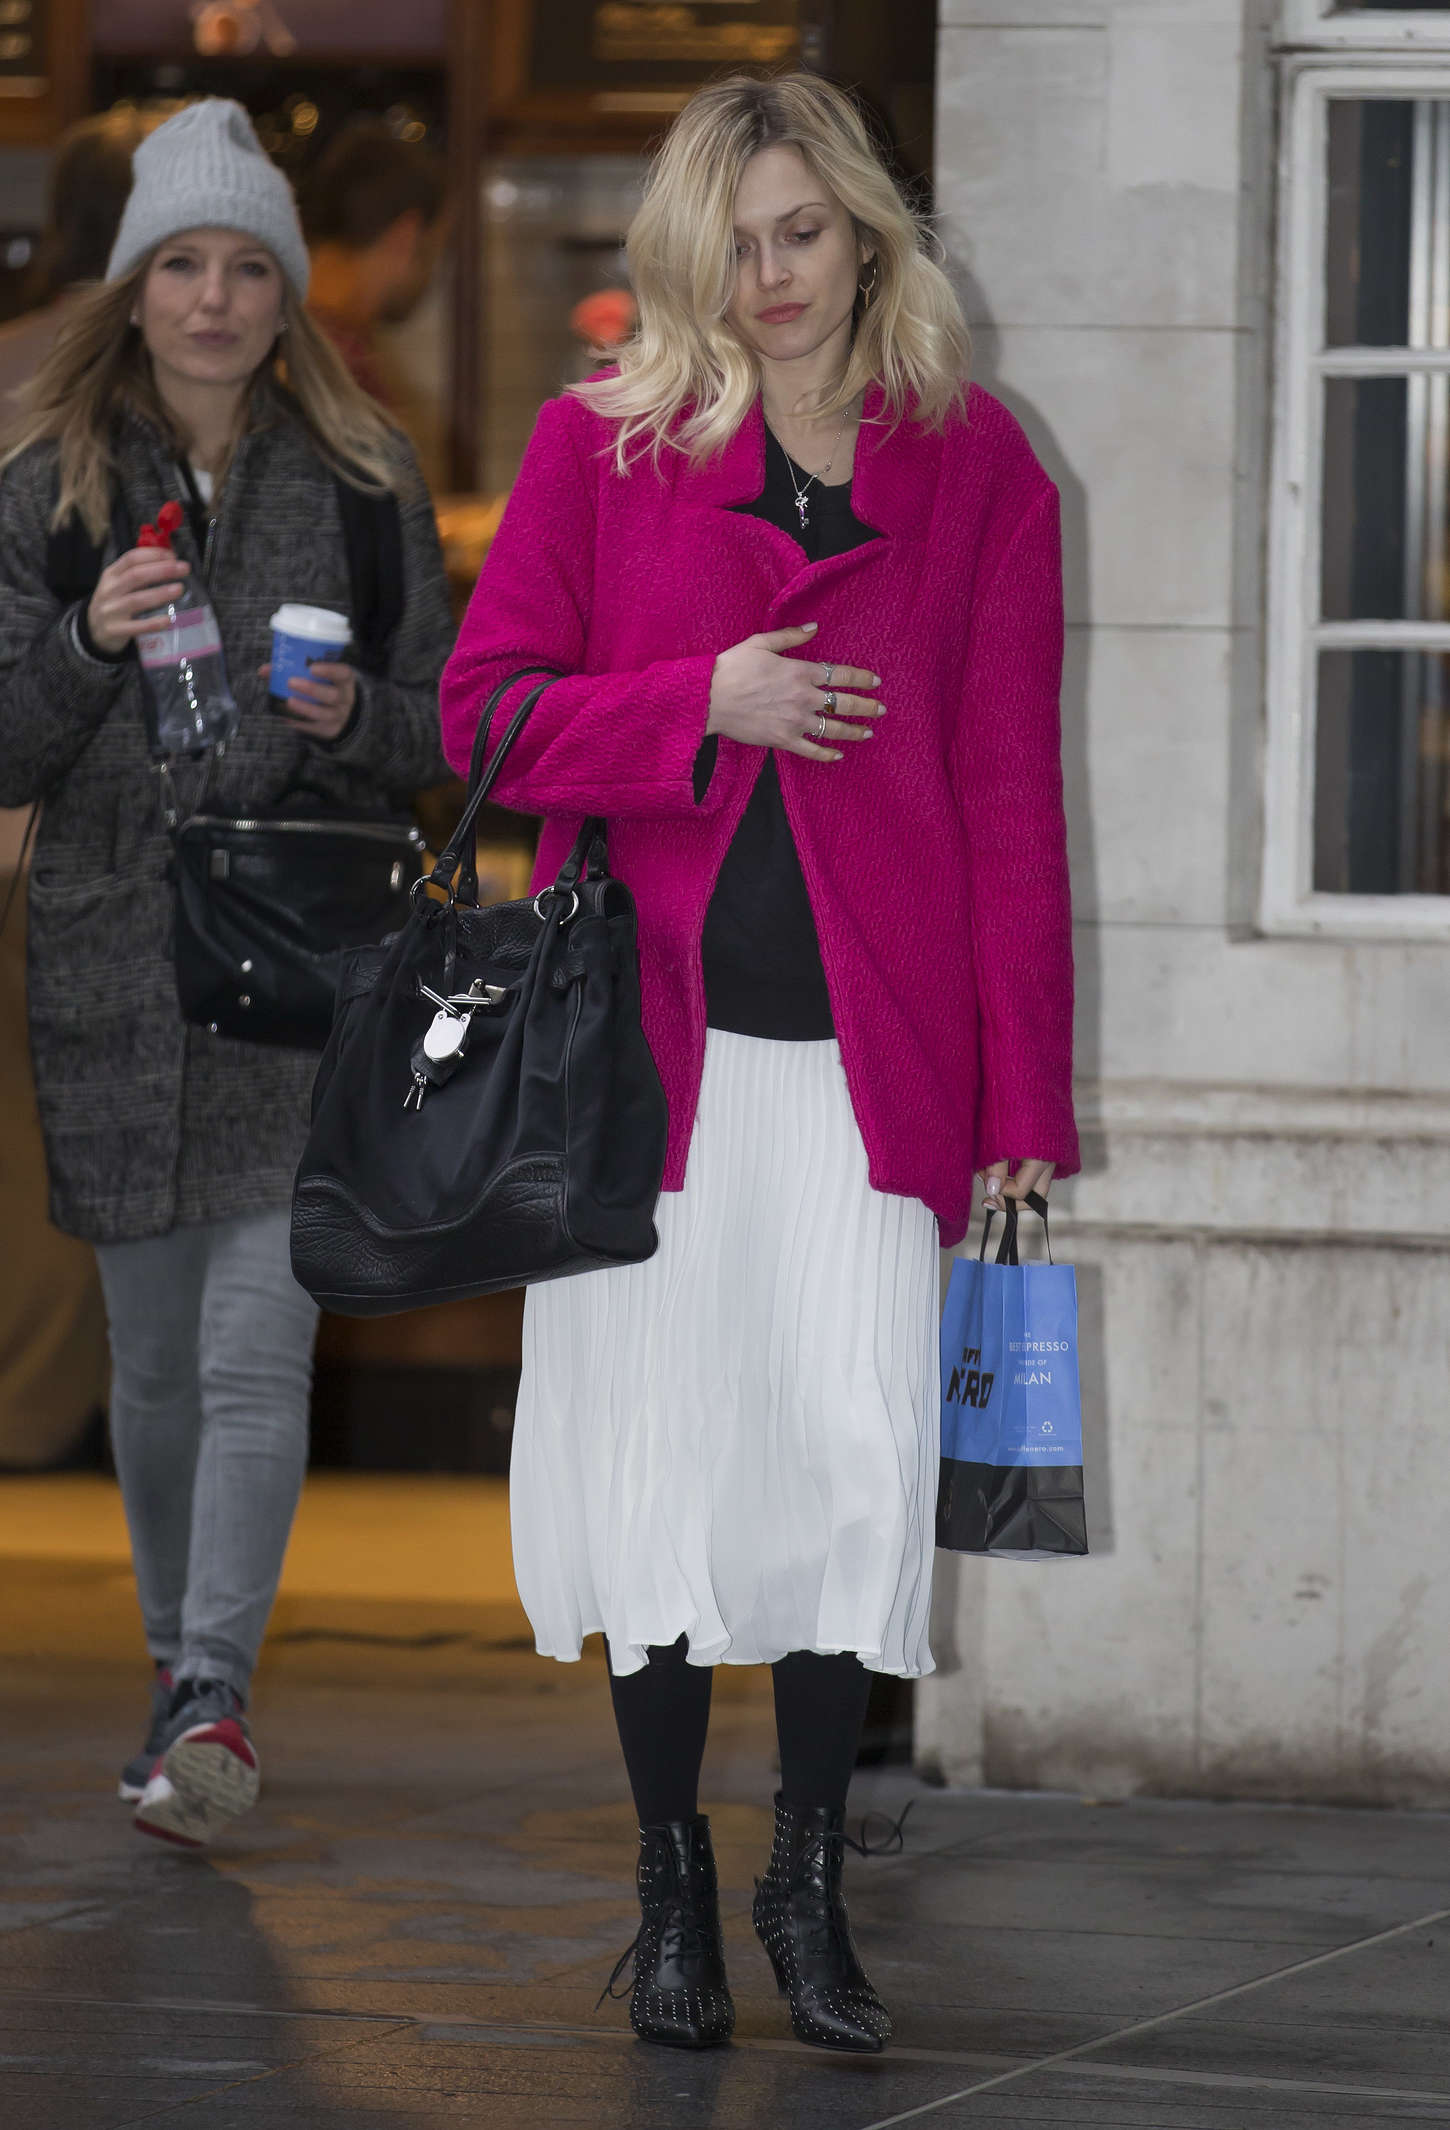 Fearne Cotton in White Skirt at BBC Radio studios in London